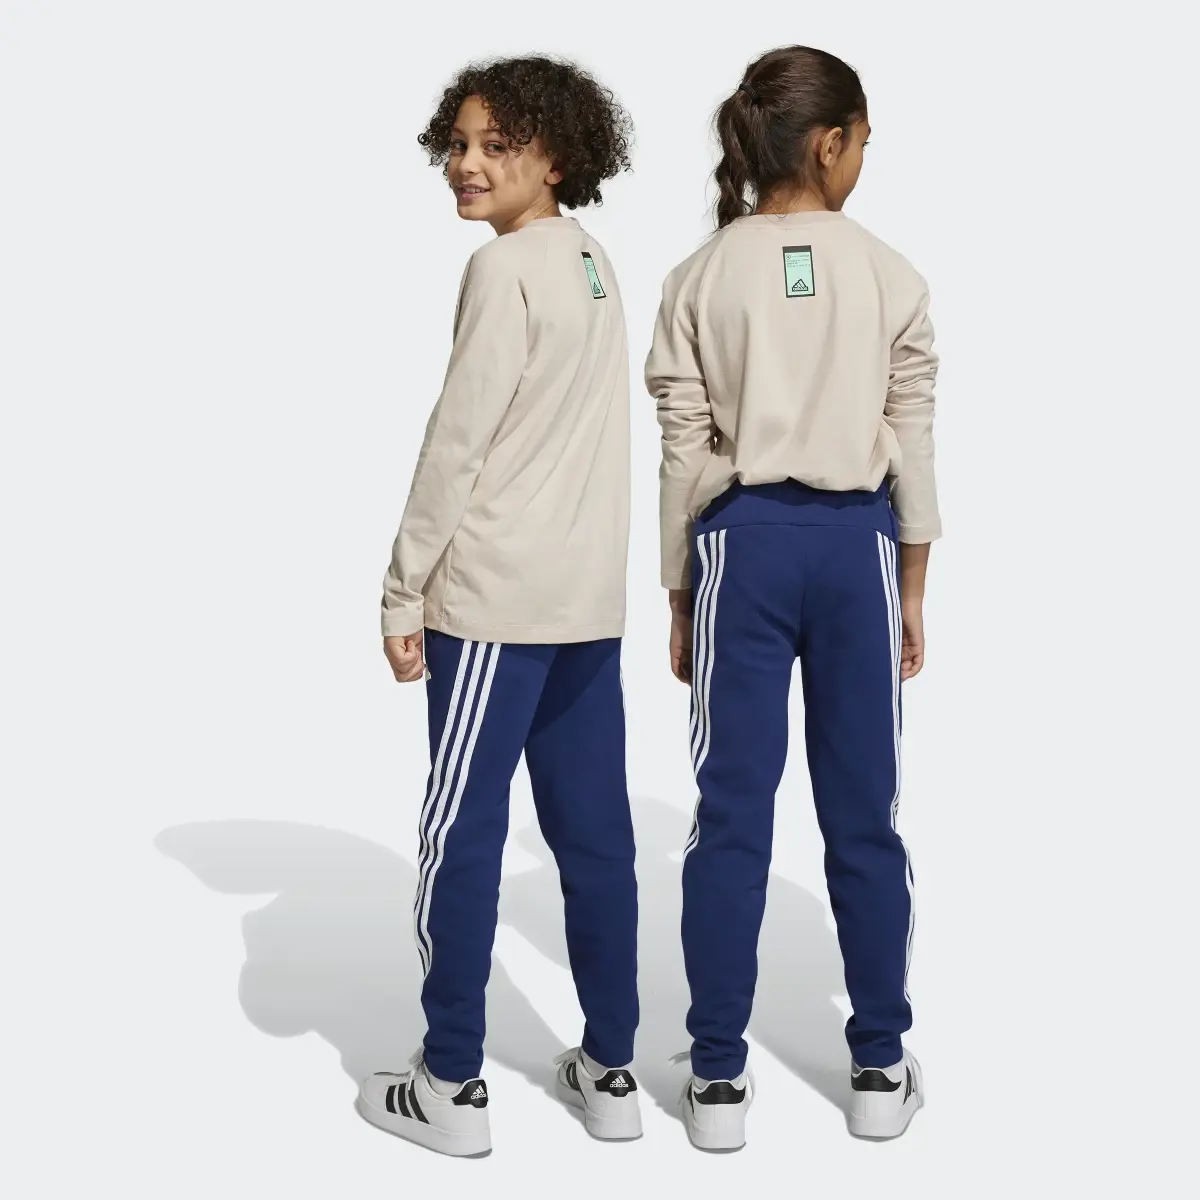 Adidas Future Icons 3-Stripes Ankle-Length Joggers. 2